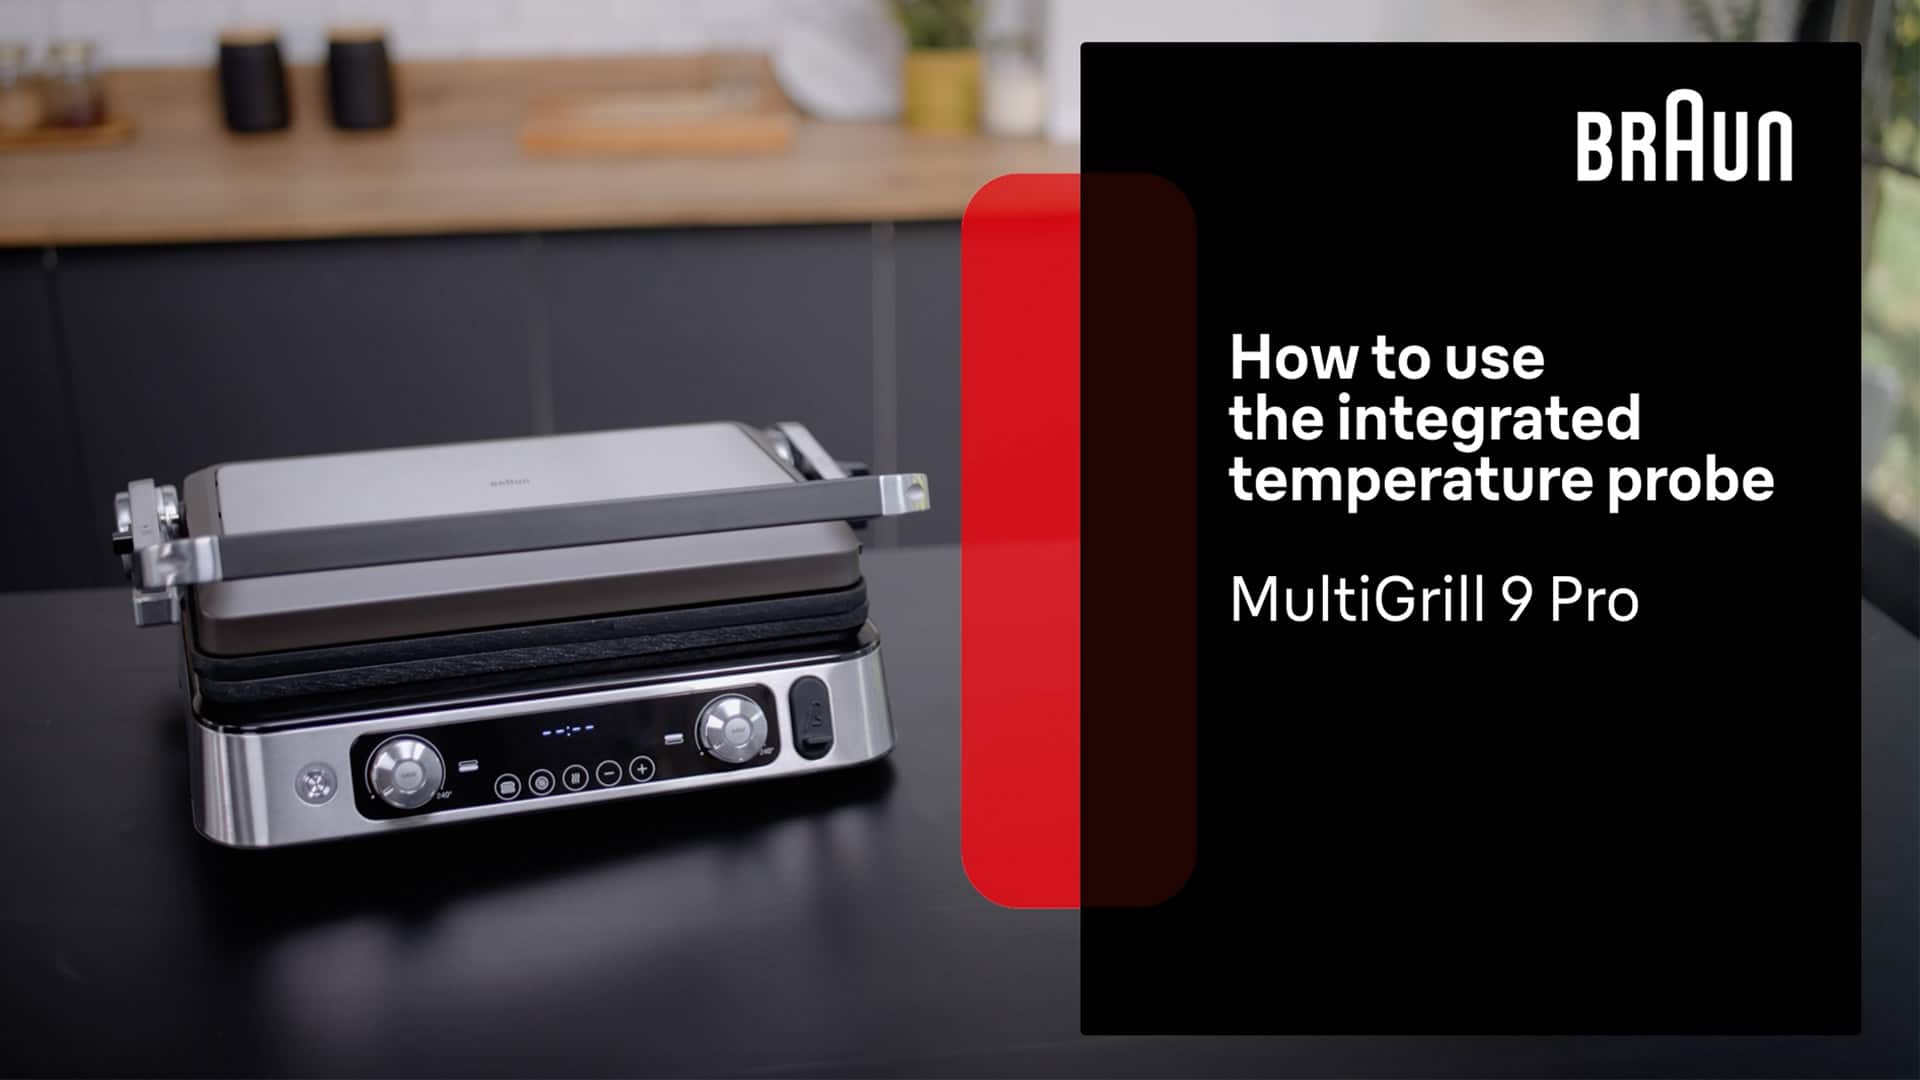 Braun MultiGrill 9 Pro | How to Use the Integrated Temperature Probe